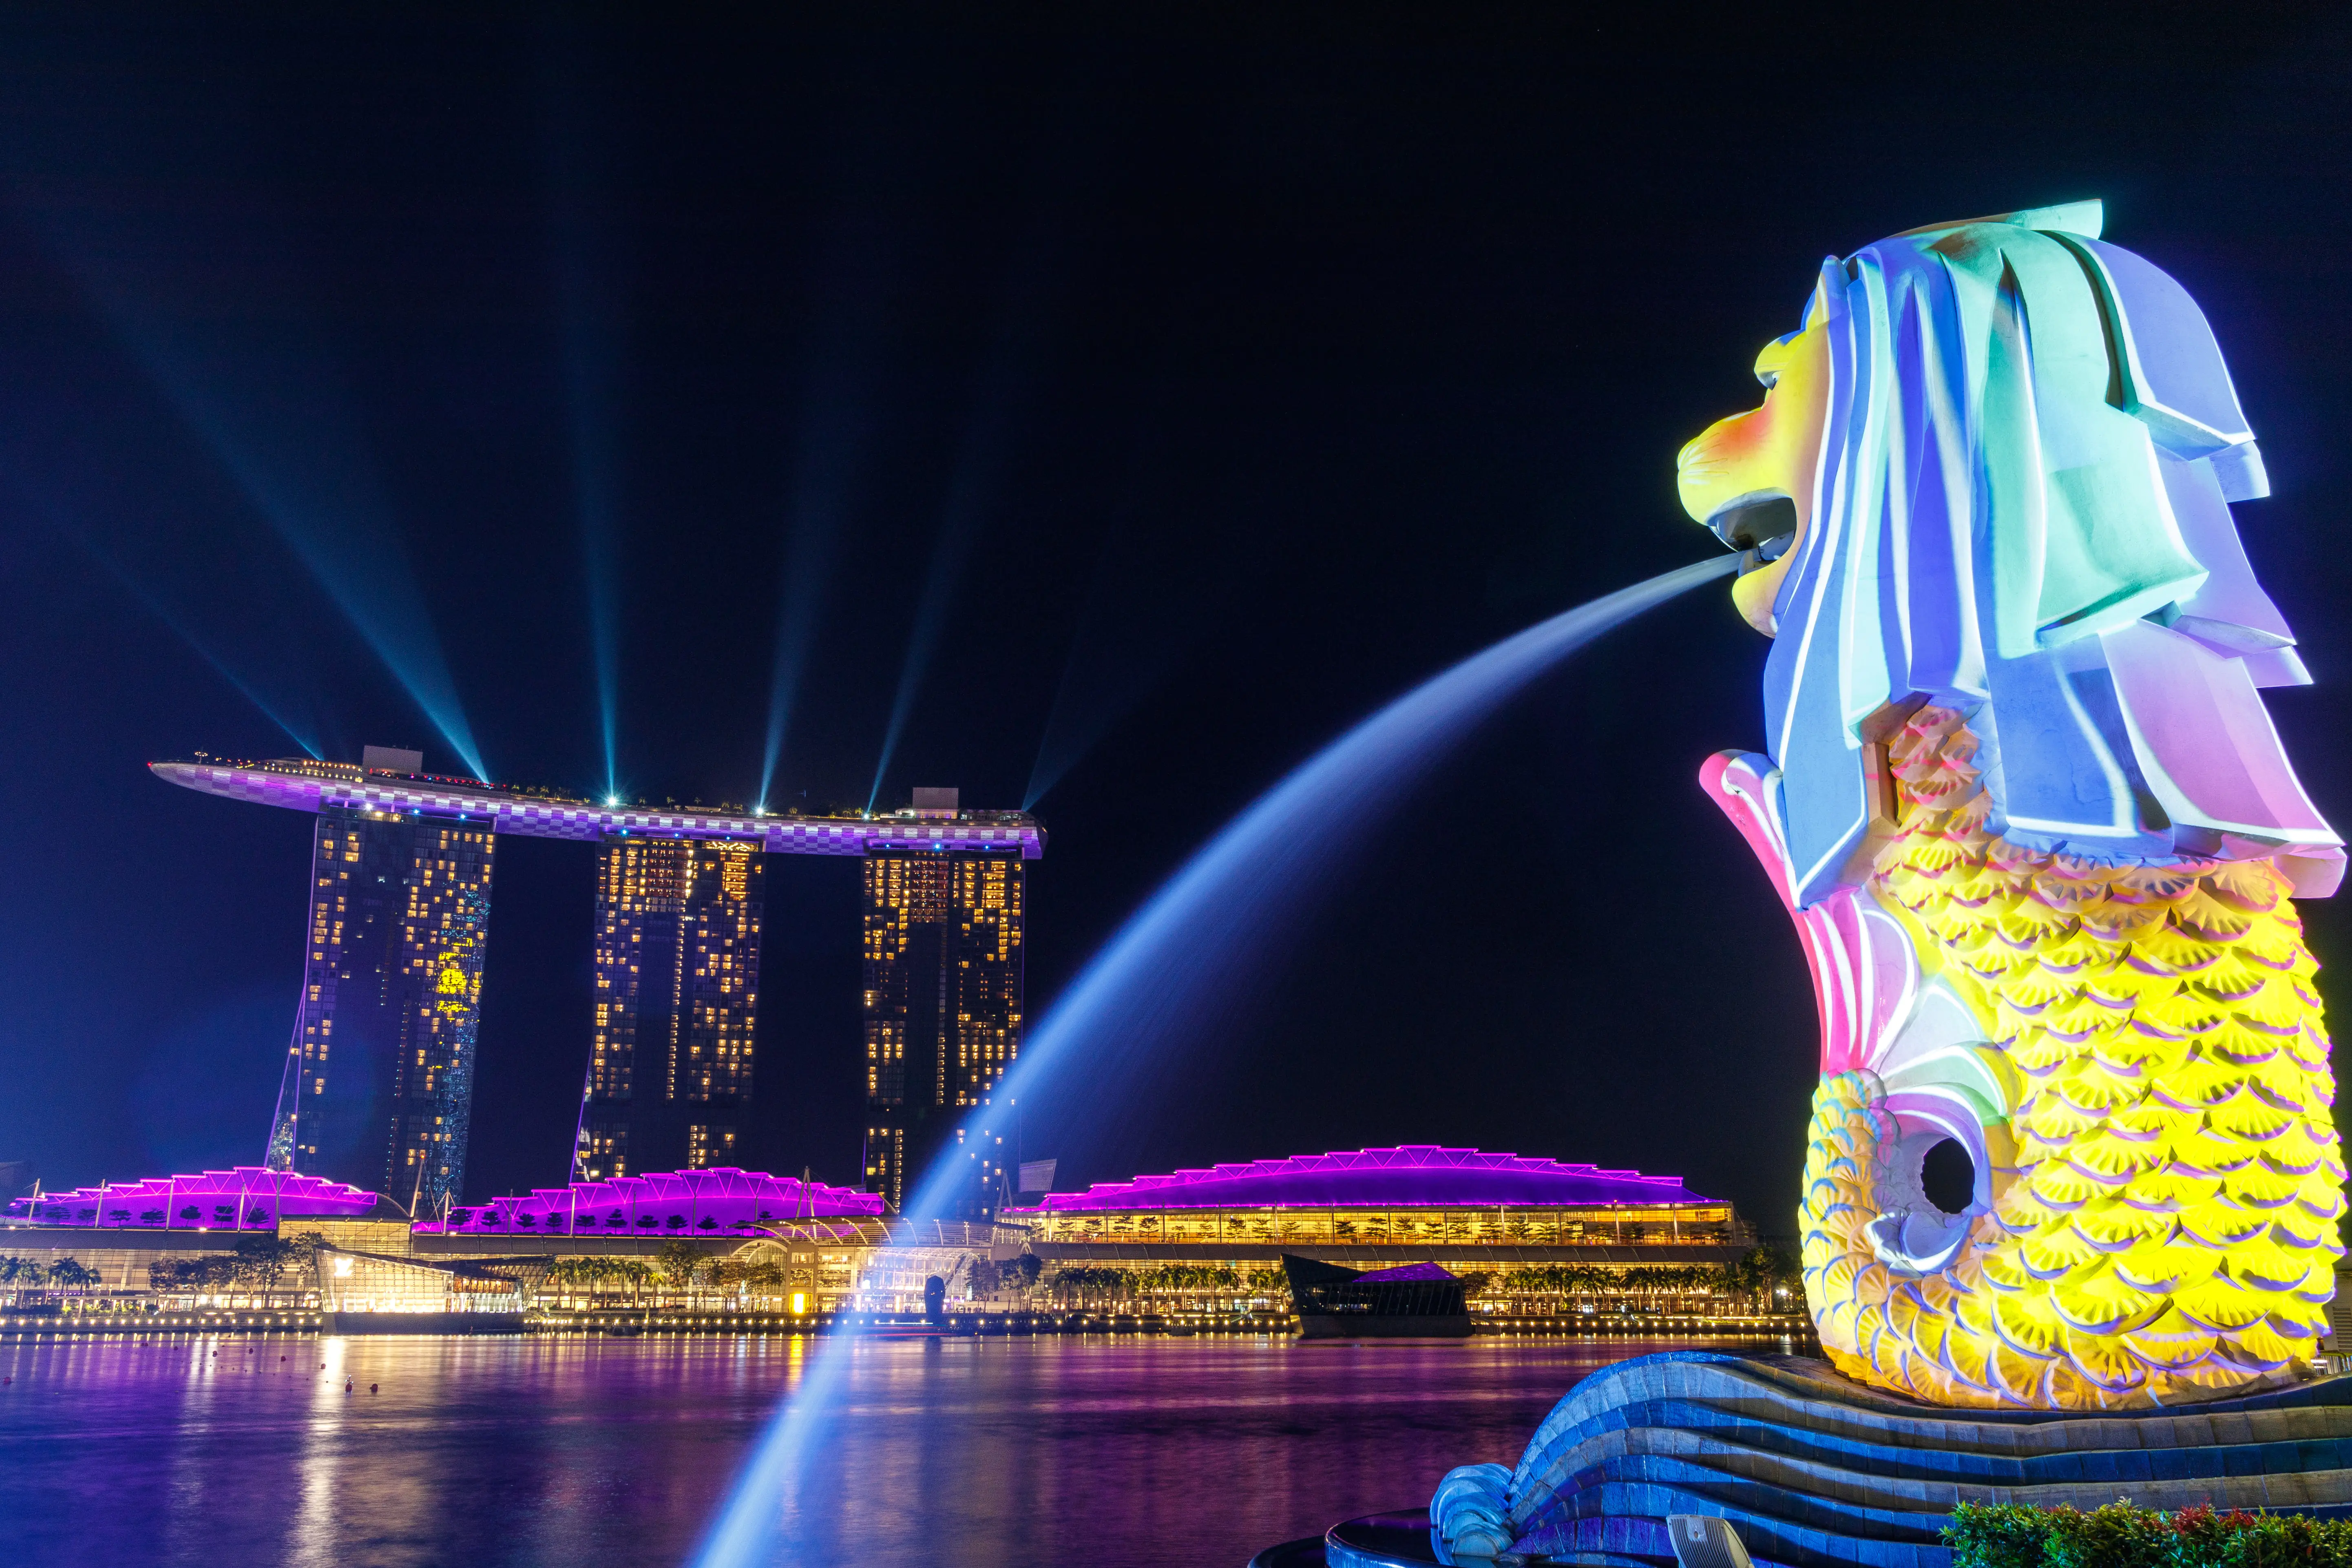 Merlion in downtown Singapore